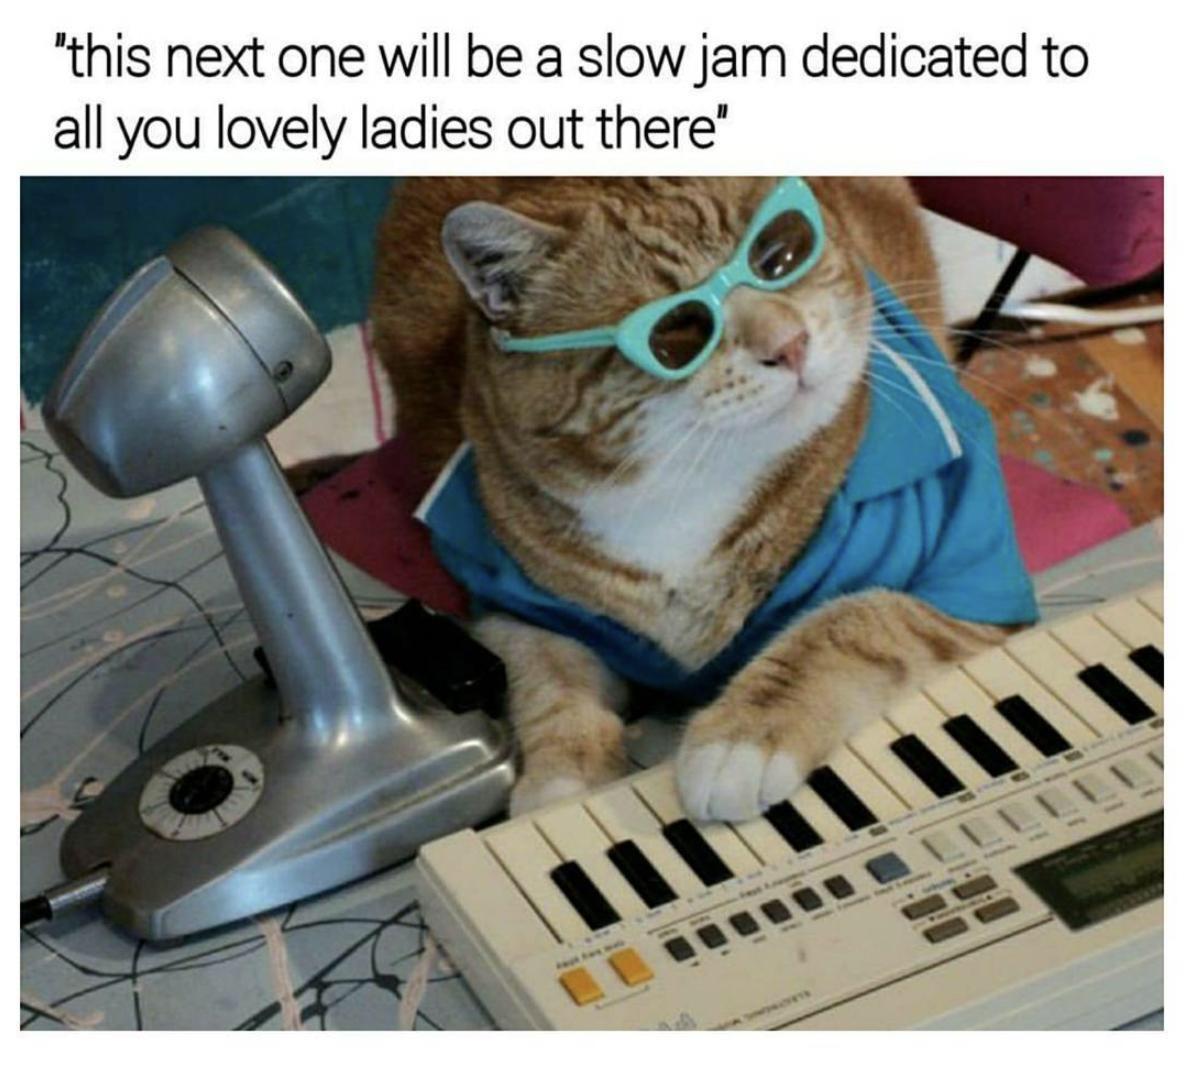 next one's a slow jam - "this next one will be a slow jam dedicated to all you lovely ladies out there"